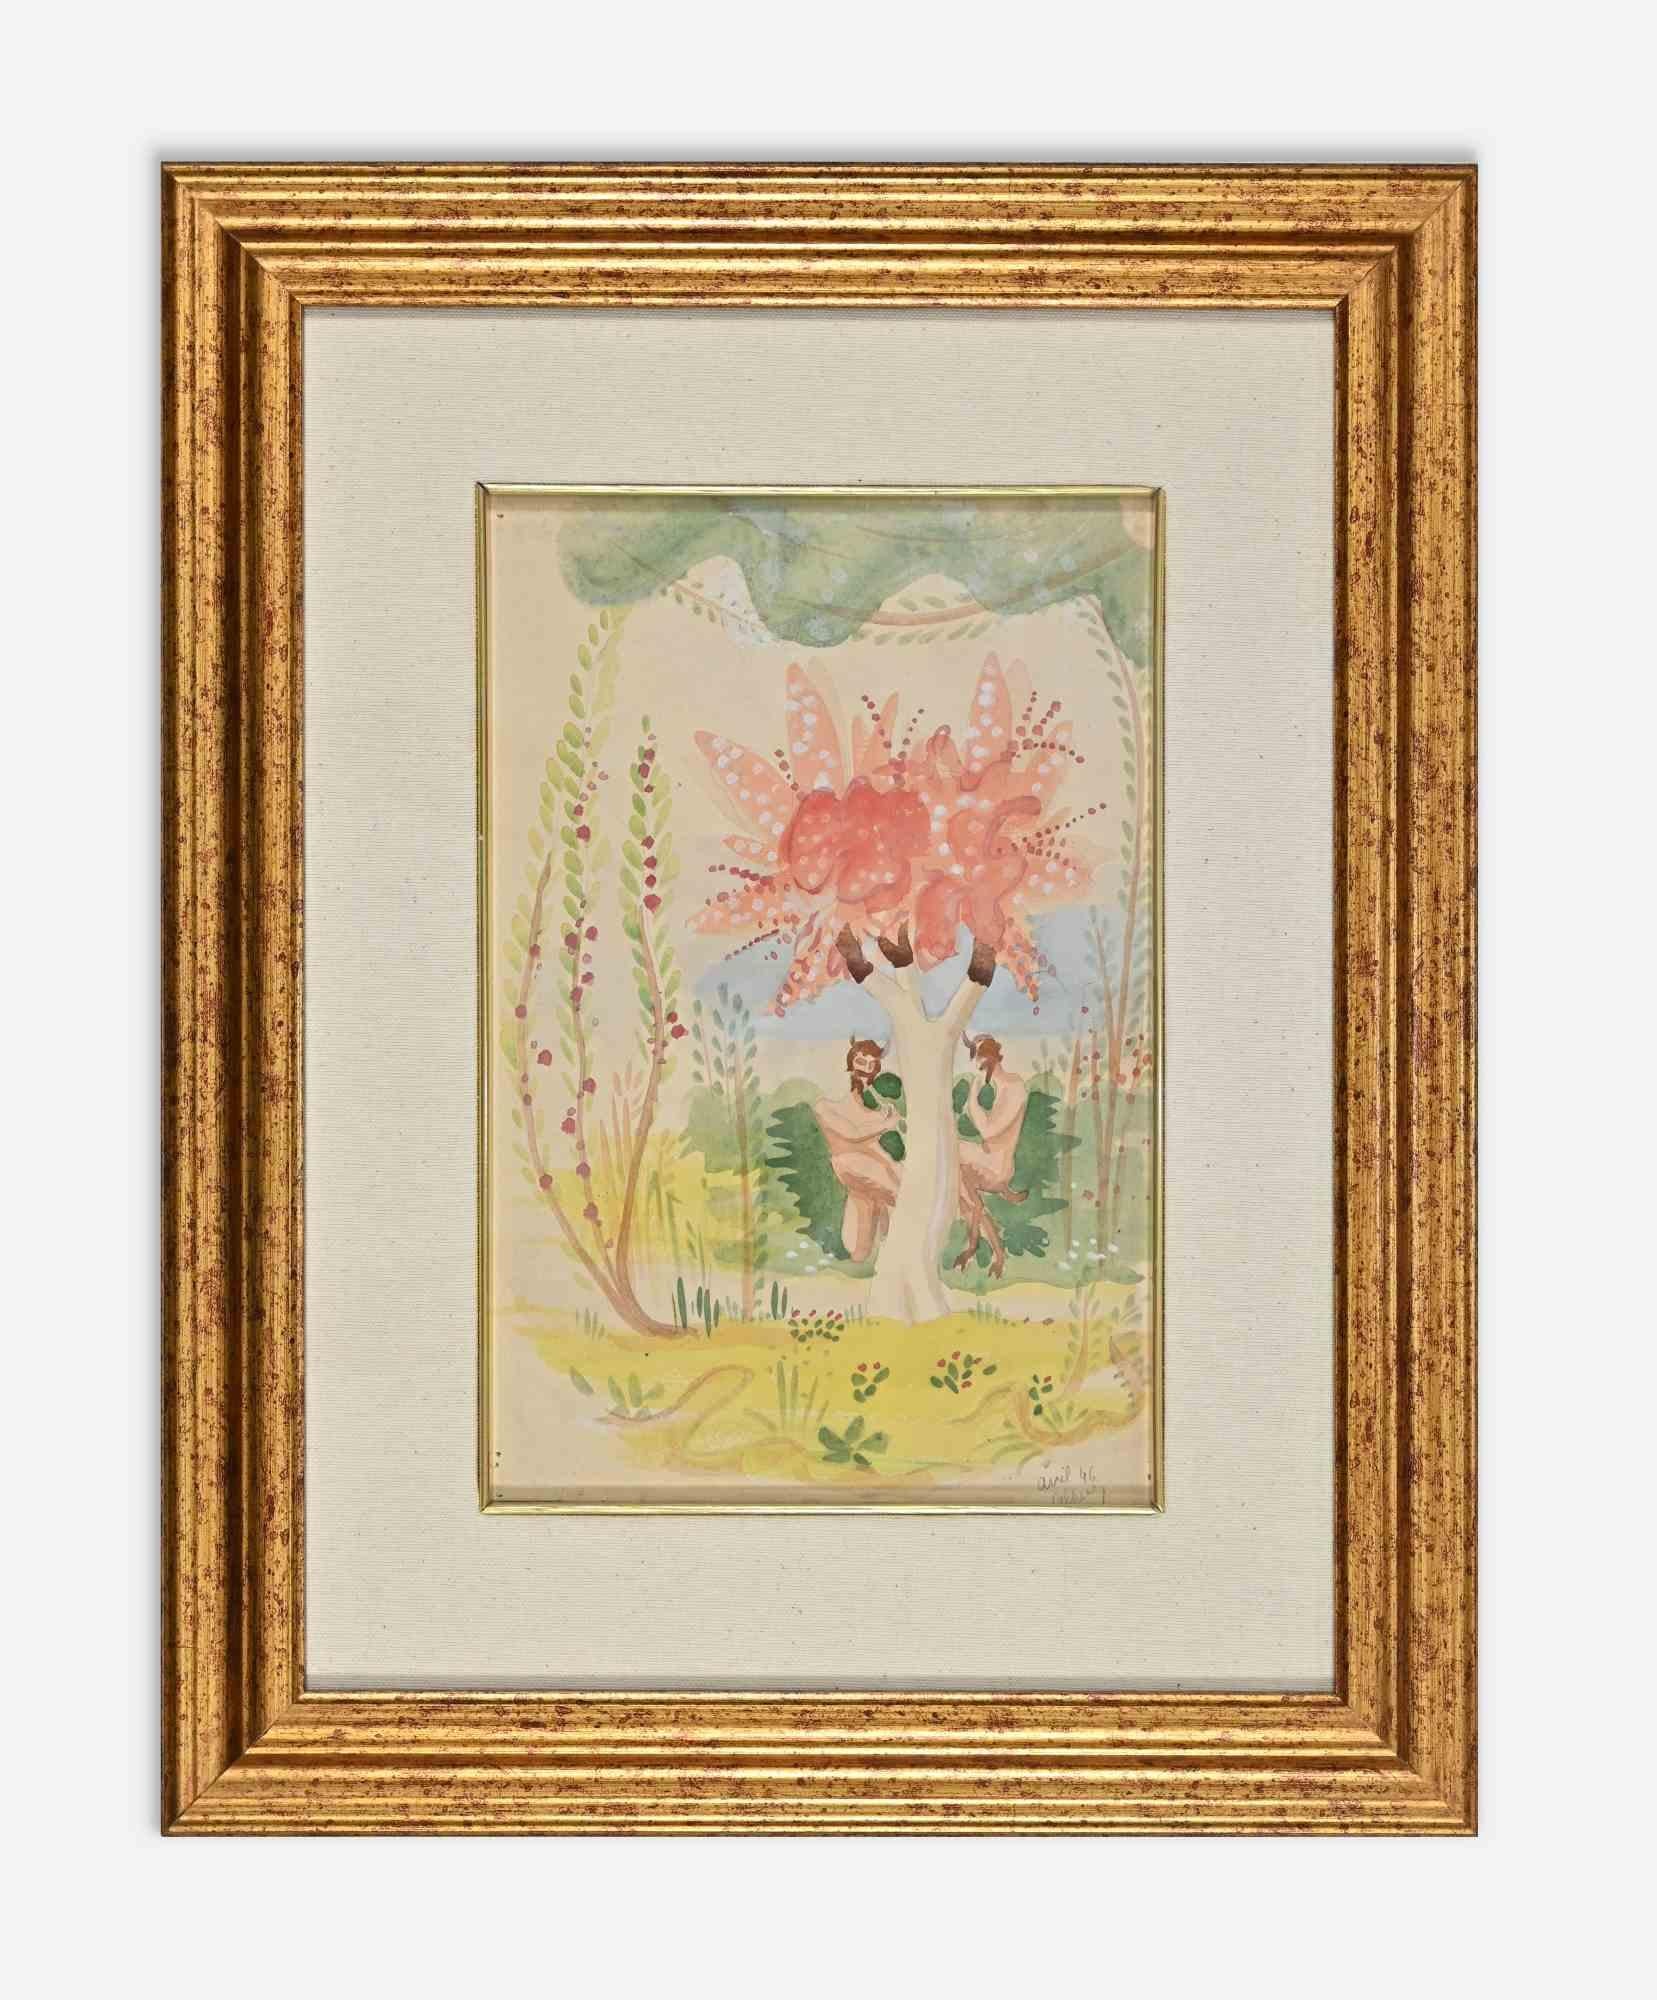 Bucolic Garden is an original drawing in watercolor on paper, realized by Jean Delpech (1916-1988) in 1946.

Hand signed and dated on the lower right margin.

Includes frame: 50 x 39.5 cm

Jean-Raymond Delpech (1988-1916) is a French painter,